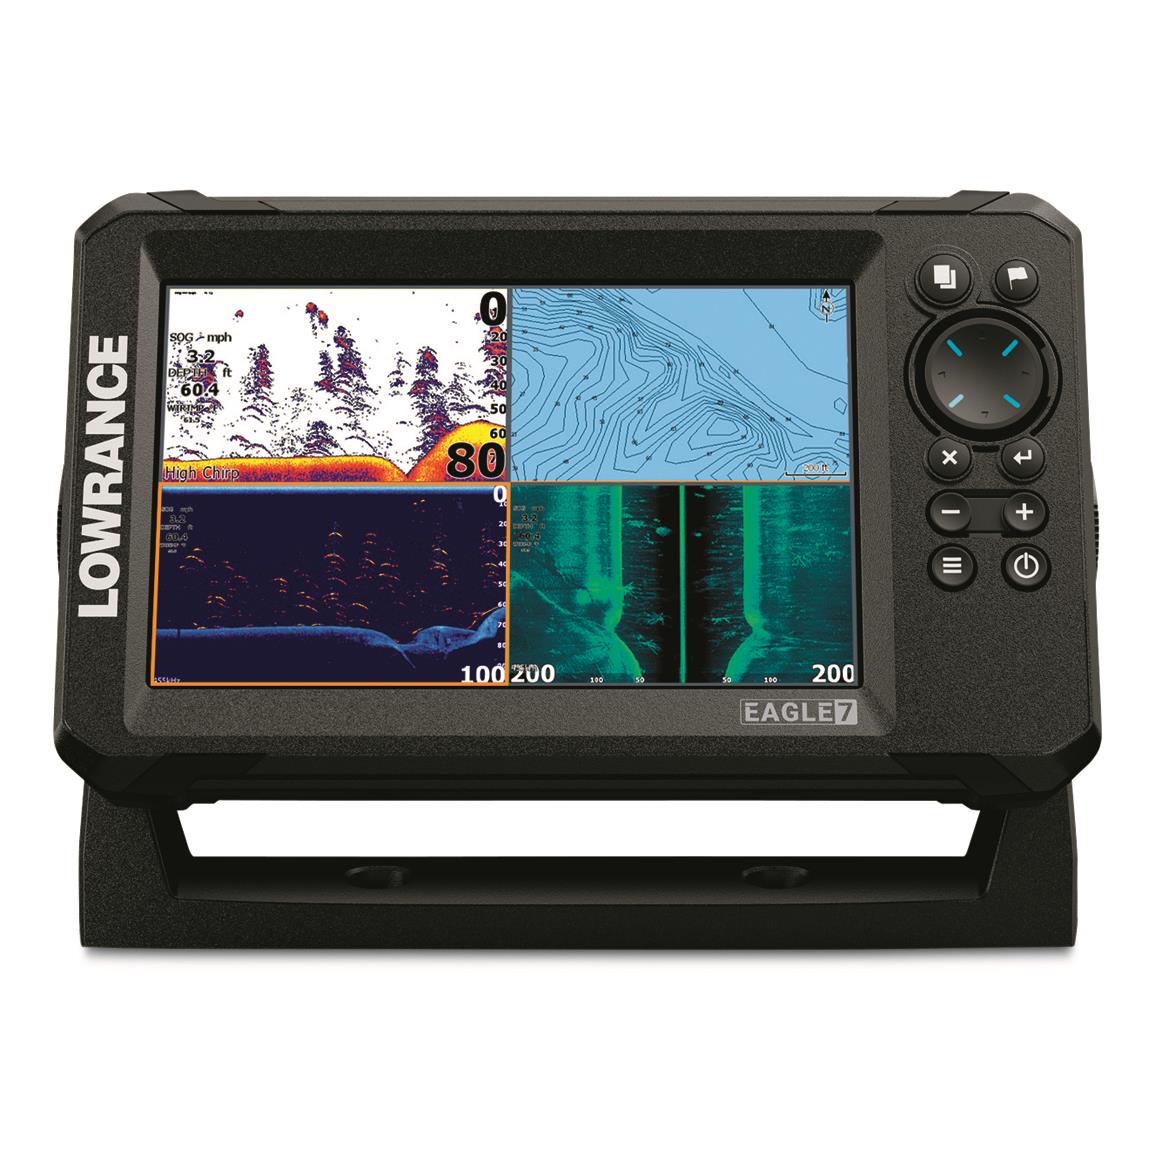 Lowrance Eagle 7 TS Fishfinder with C-MAP for U.S. and Canada